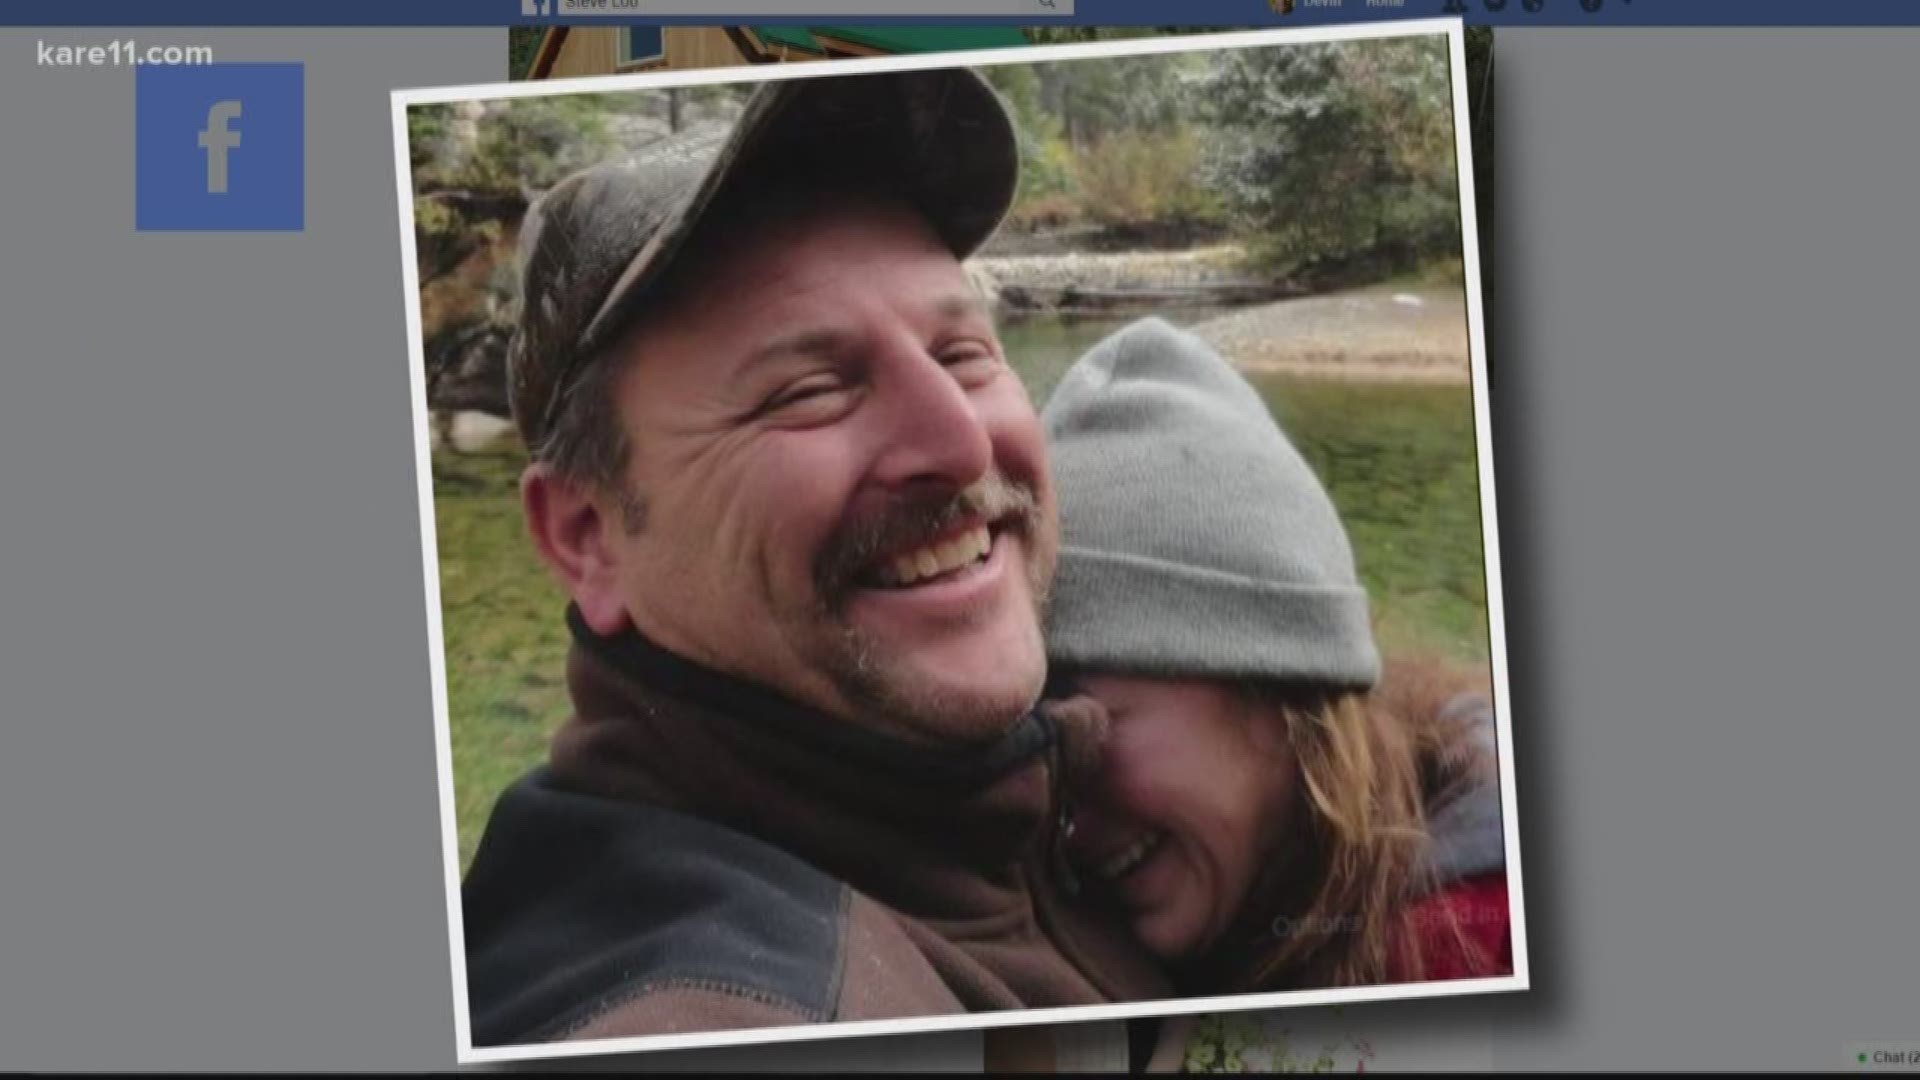 A couple killed in a motorcycle accident left behind a legacy of community service. Steve Nanney was a police officer in Blaine, and his wife Susie was an associate professor at the U of M.